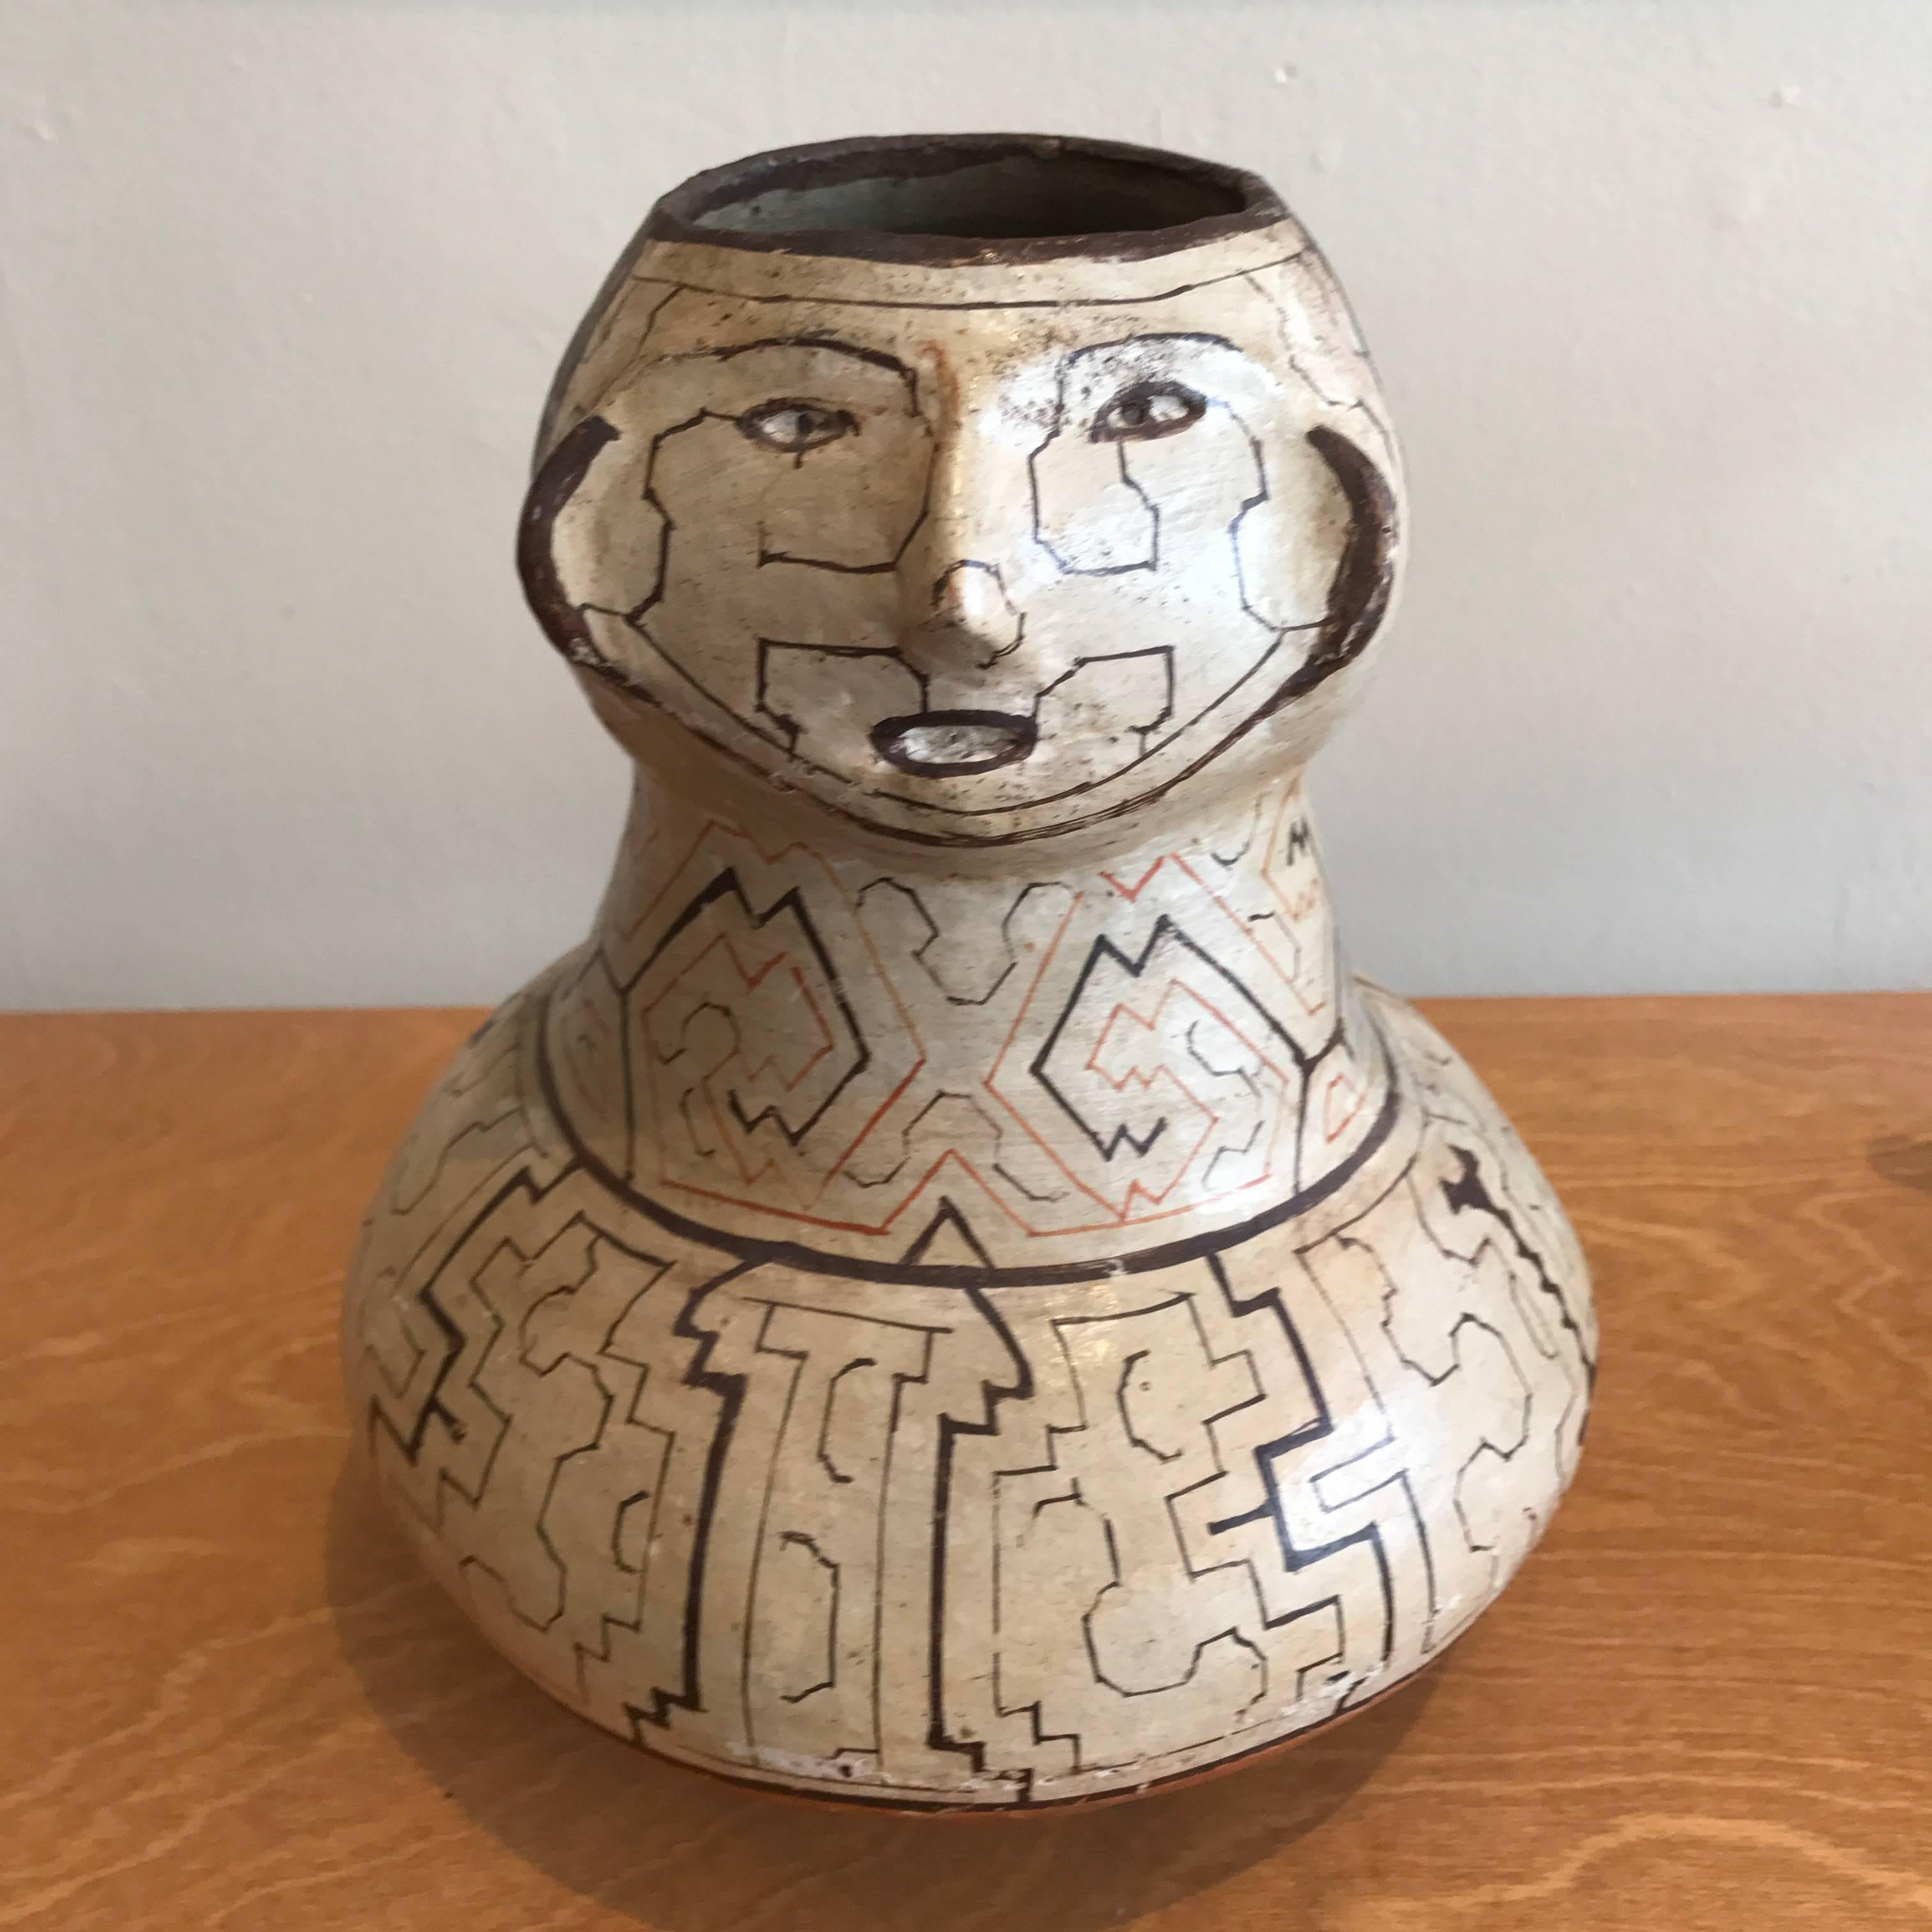 Early 20th century Shipibo vase or urn, nice form and embellishments, no structural damage or repairs, just minor wear to the resin finish from age and use.